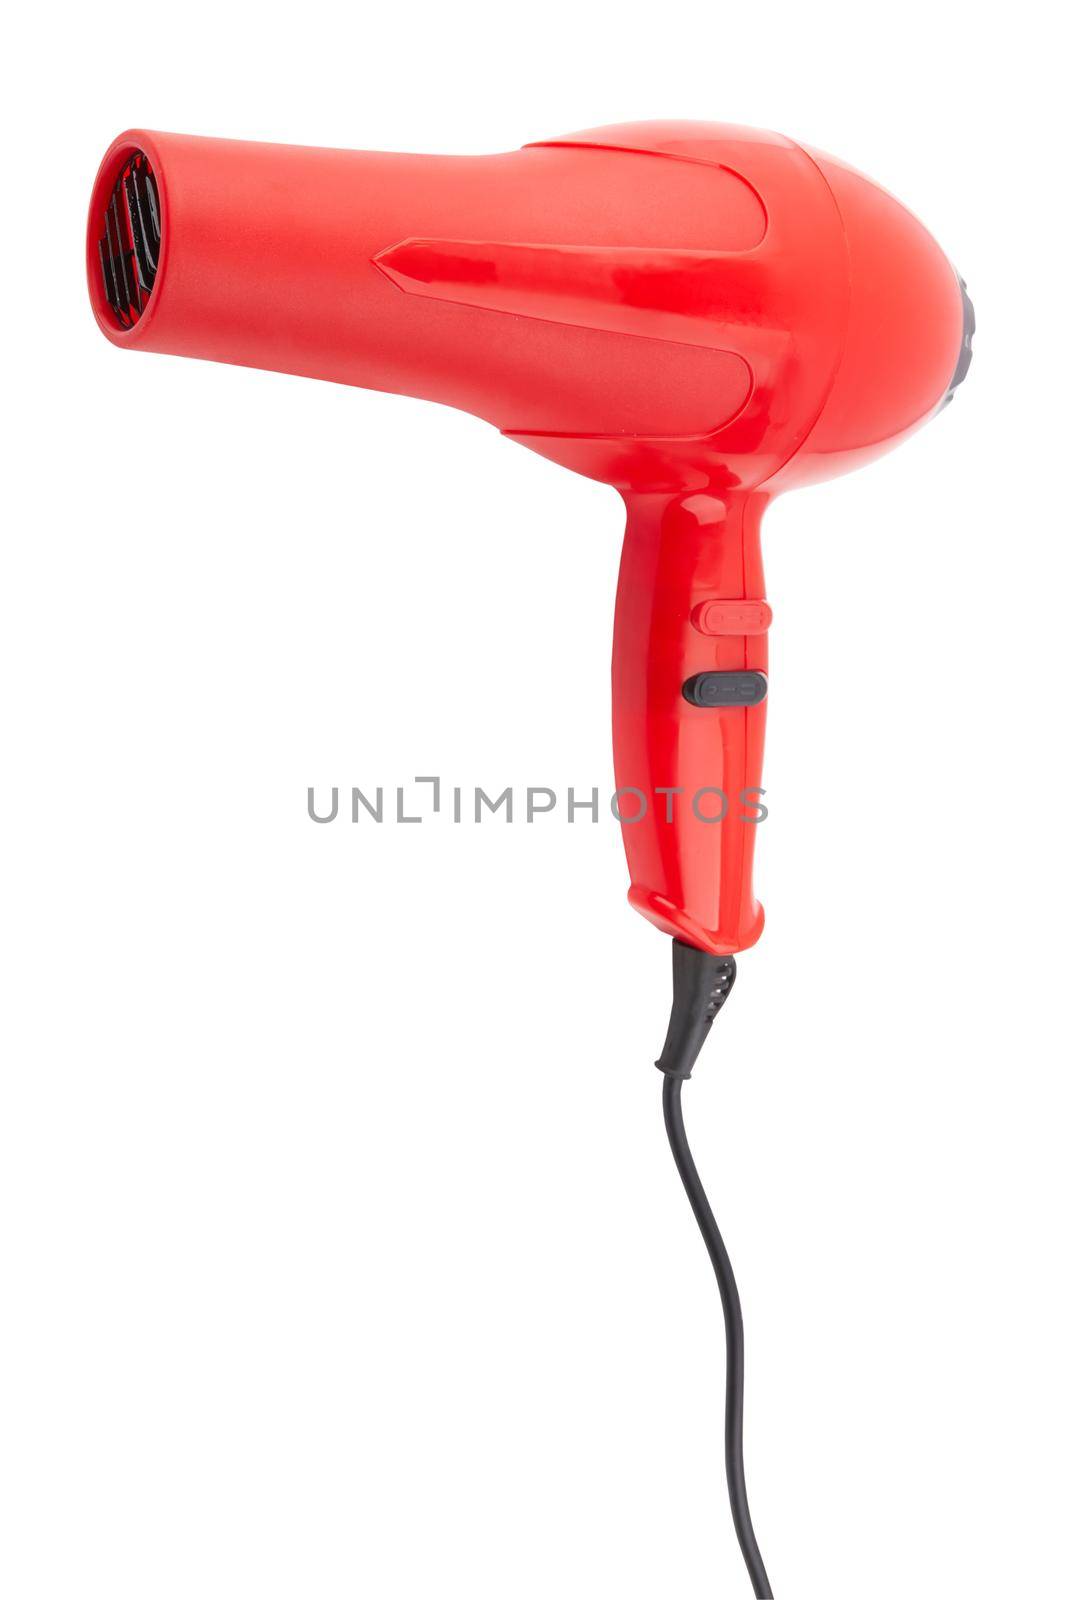 Red hair dryer isolated on a white background